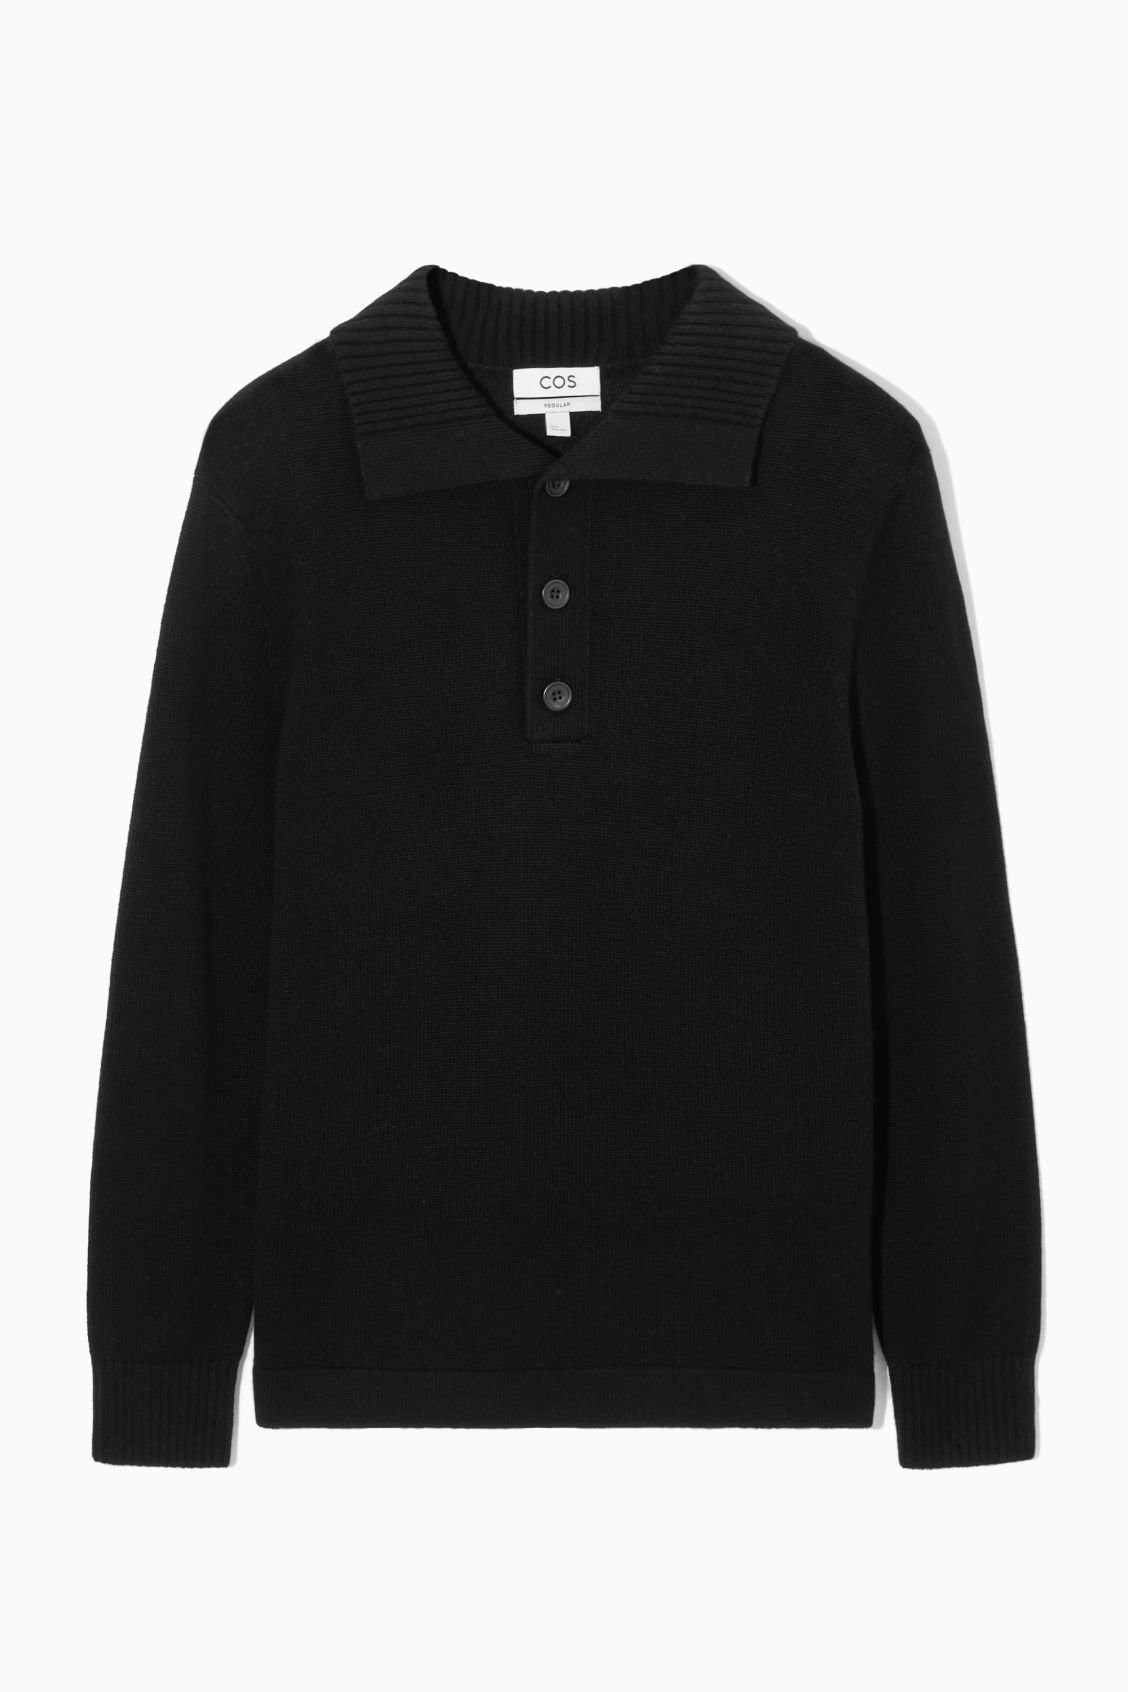 COS Wool And Cashmere Polo Shirt in BLACK | Endource